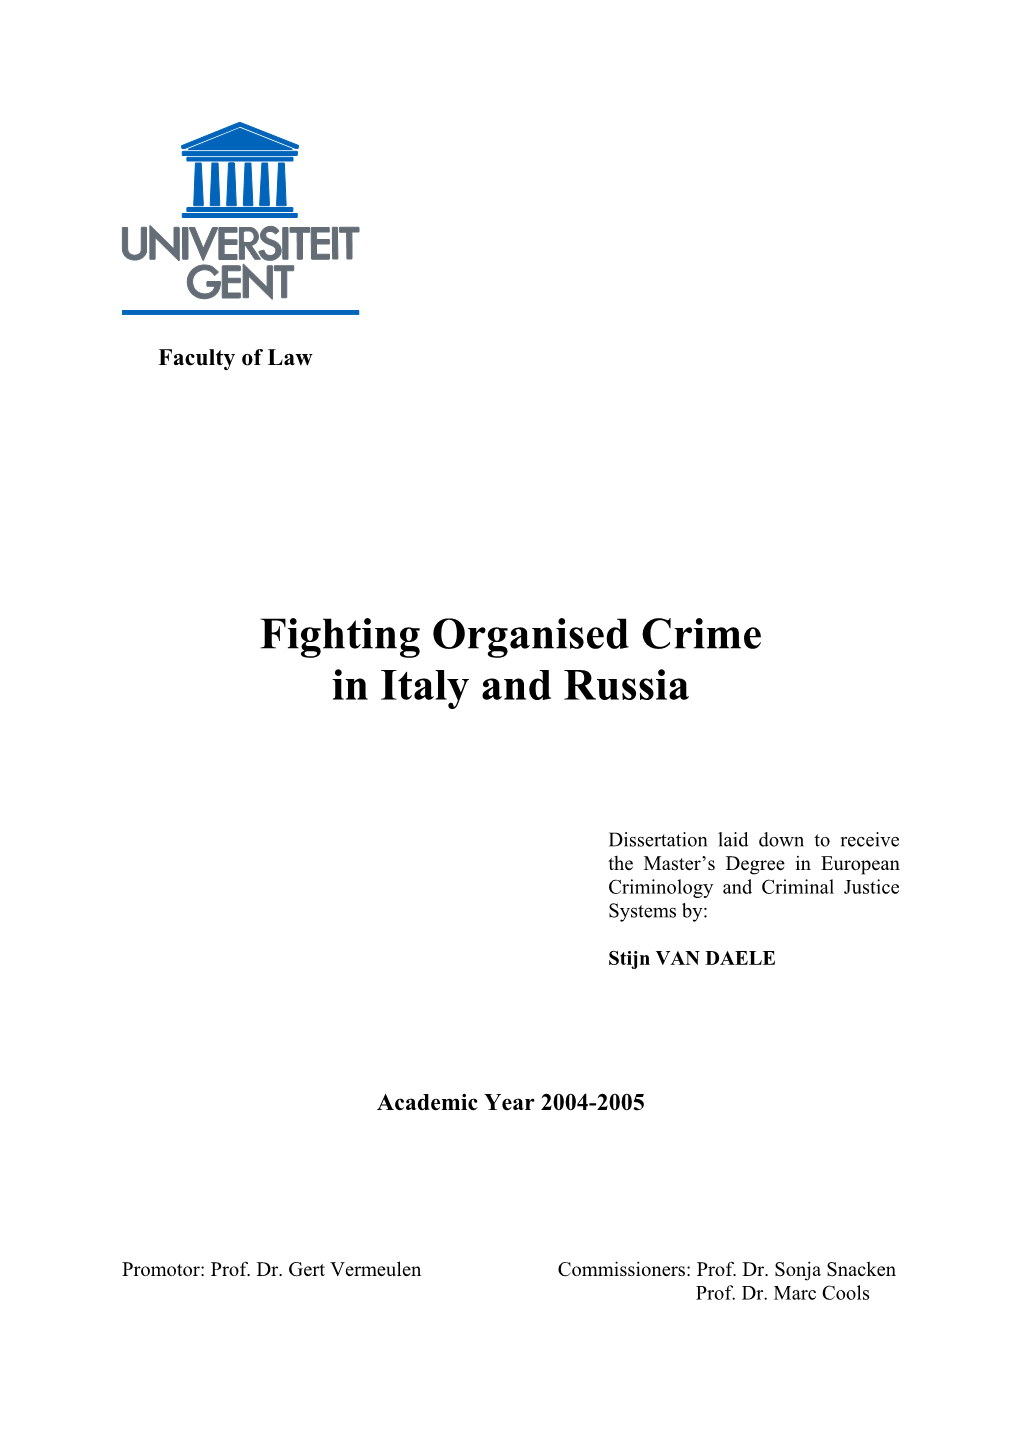 Fighting Organised Crime in Italy and Russia